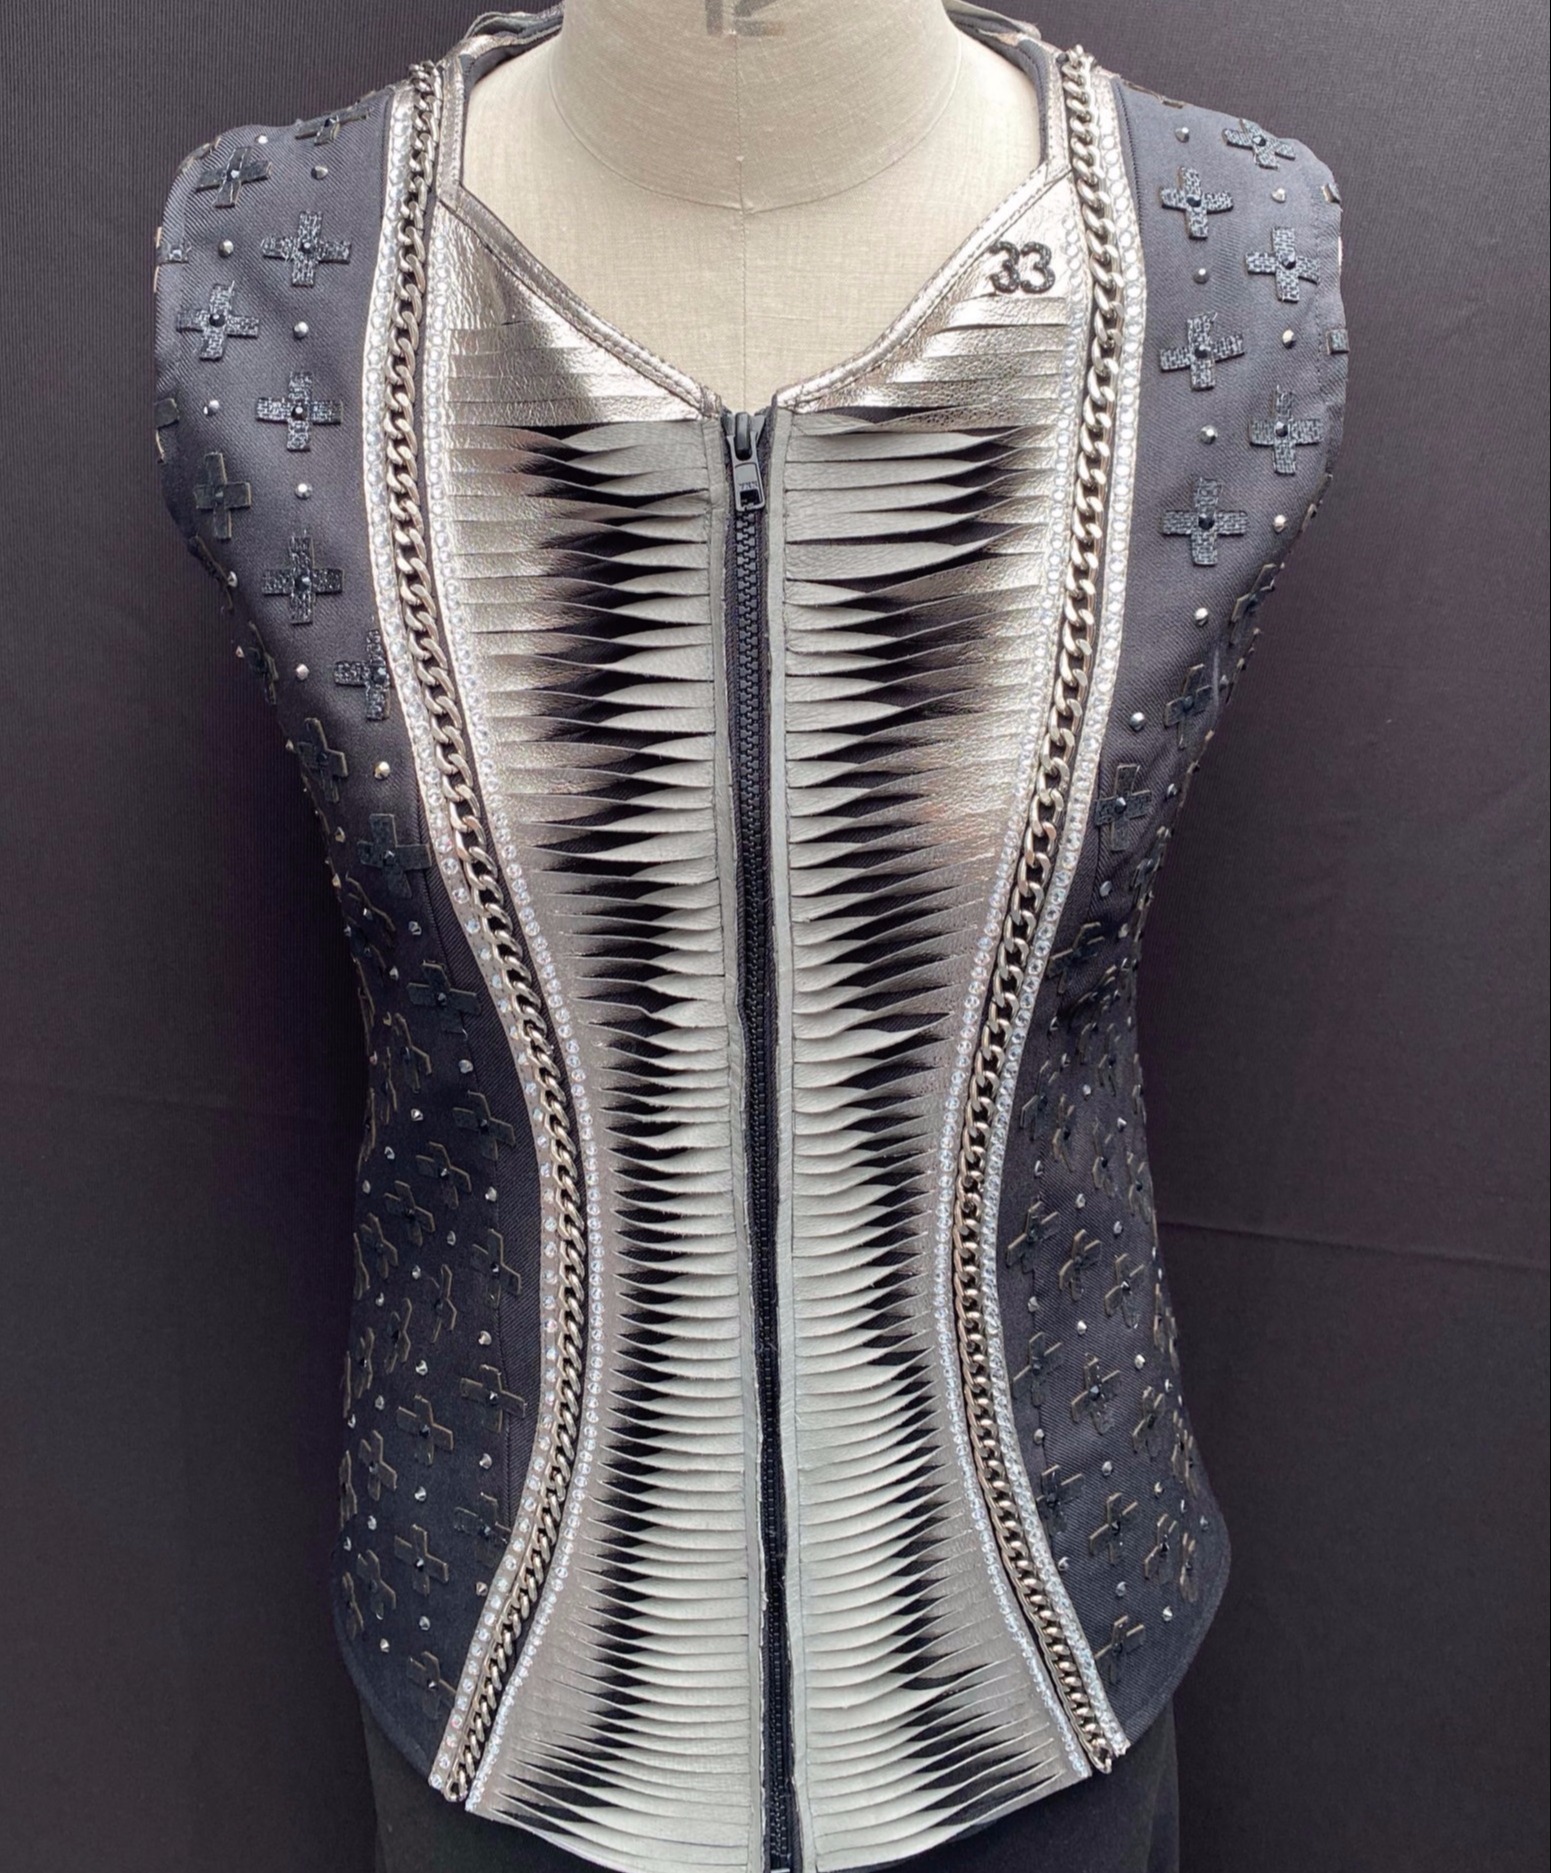 For Sale: Collection 33 dare devil riding vest detailed with silver, grey and black leathers, gunmetal chain and crystals 